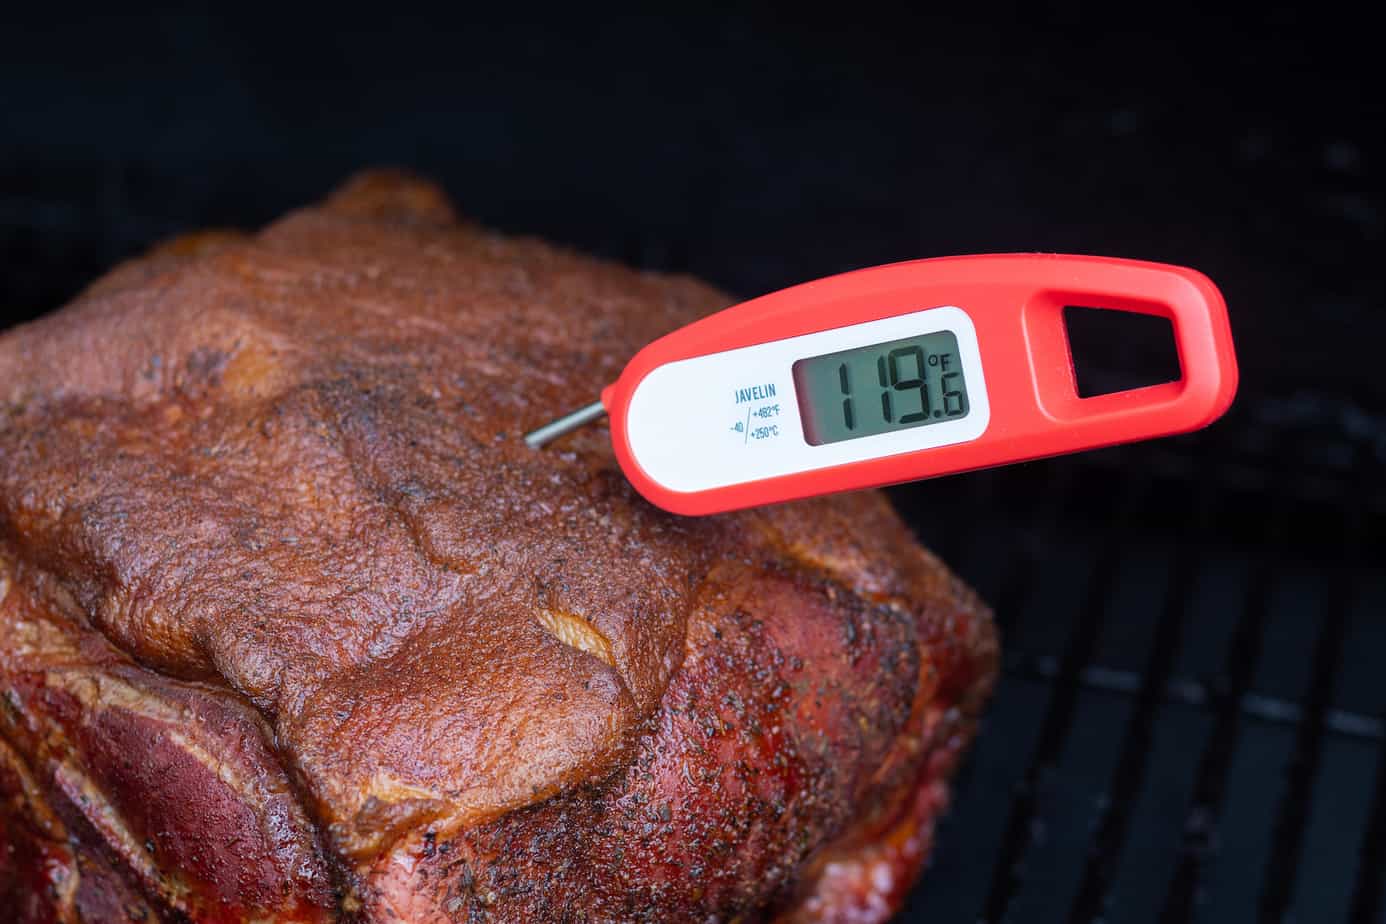 Lavatools Javelin Thermometer Review - The Grilling Life